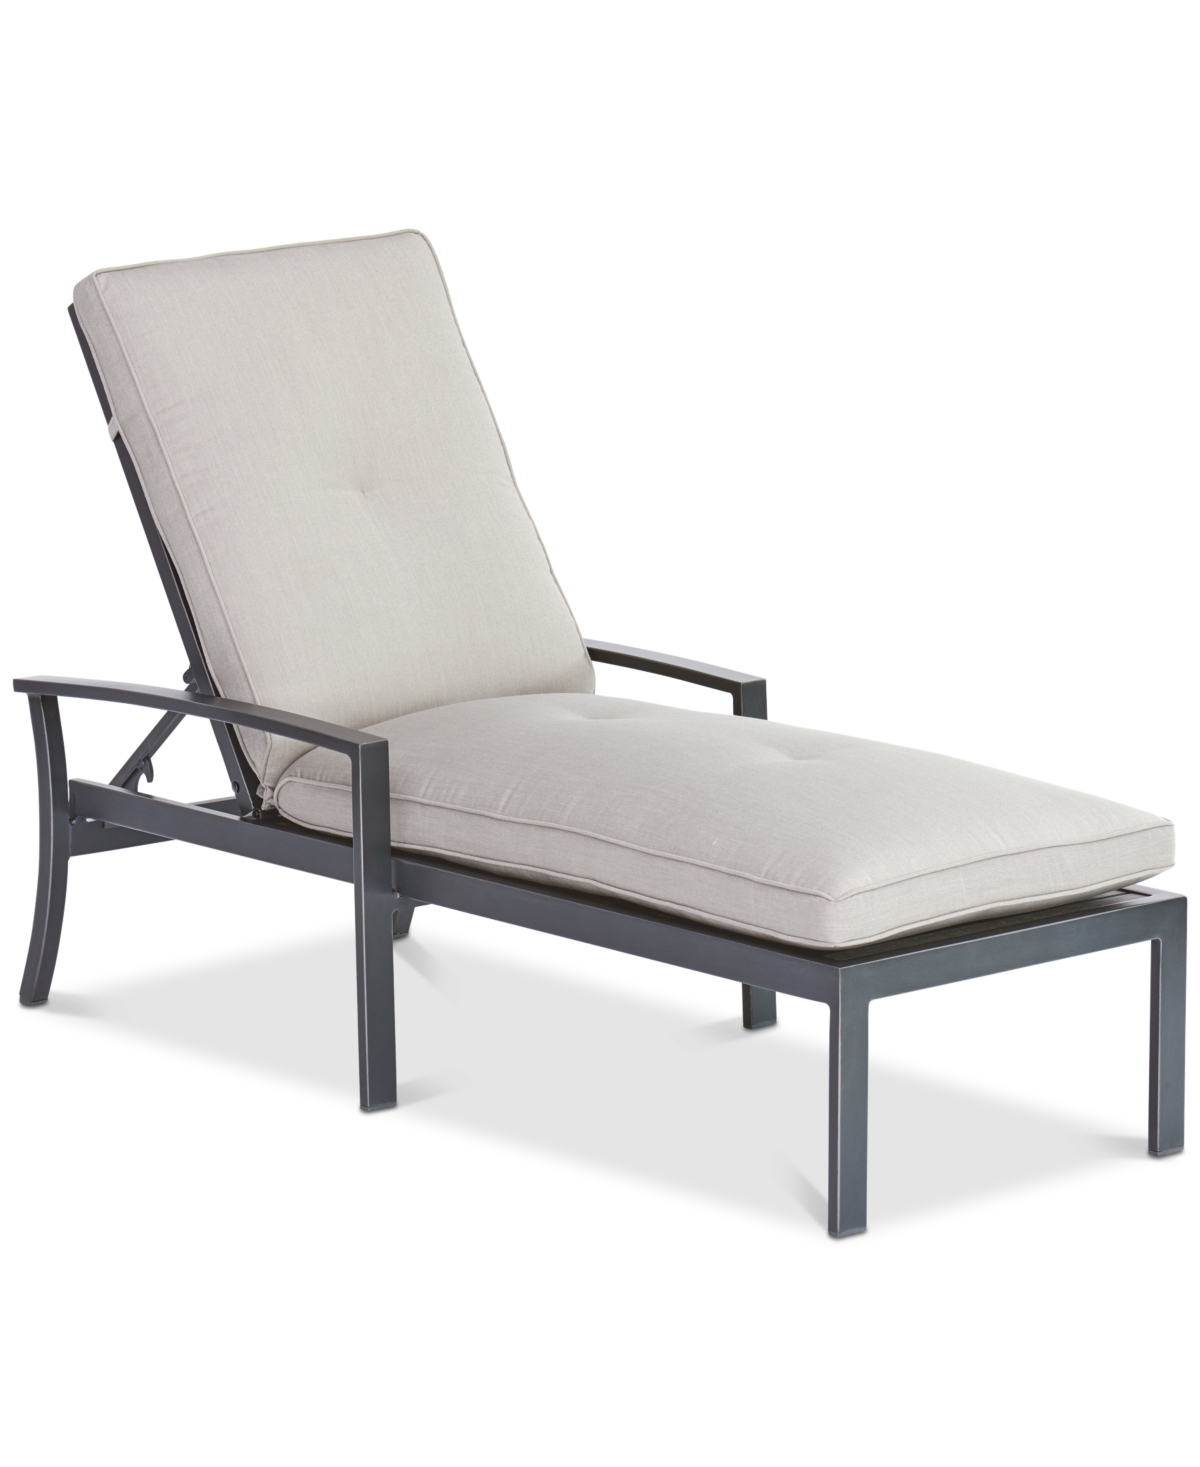 Shop Agio Closeout! Marlough Ii Aluminum Outdoor Chaise Lounge, Created For Macy's In Outdura Storm Smoke